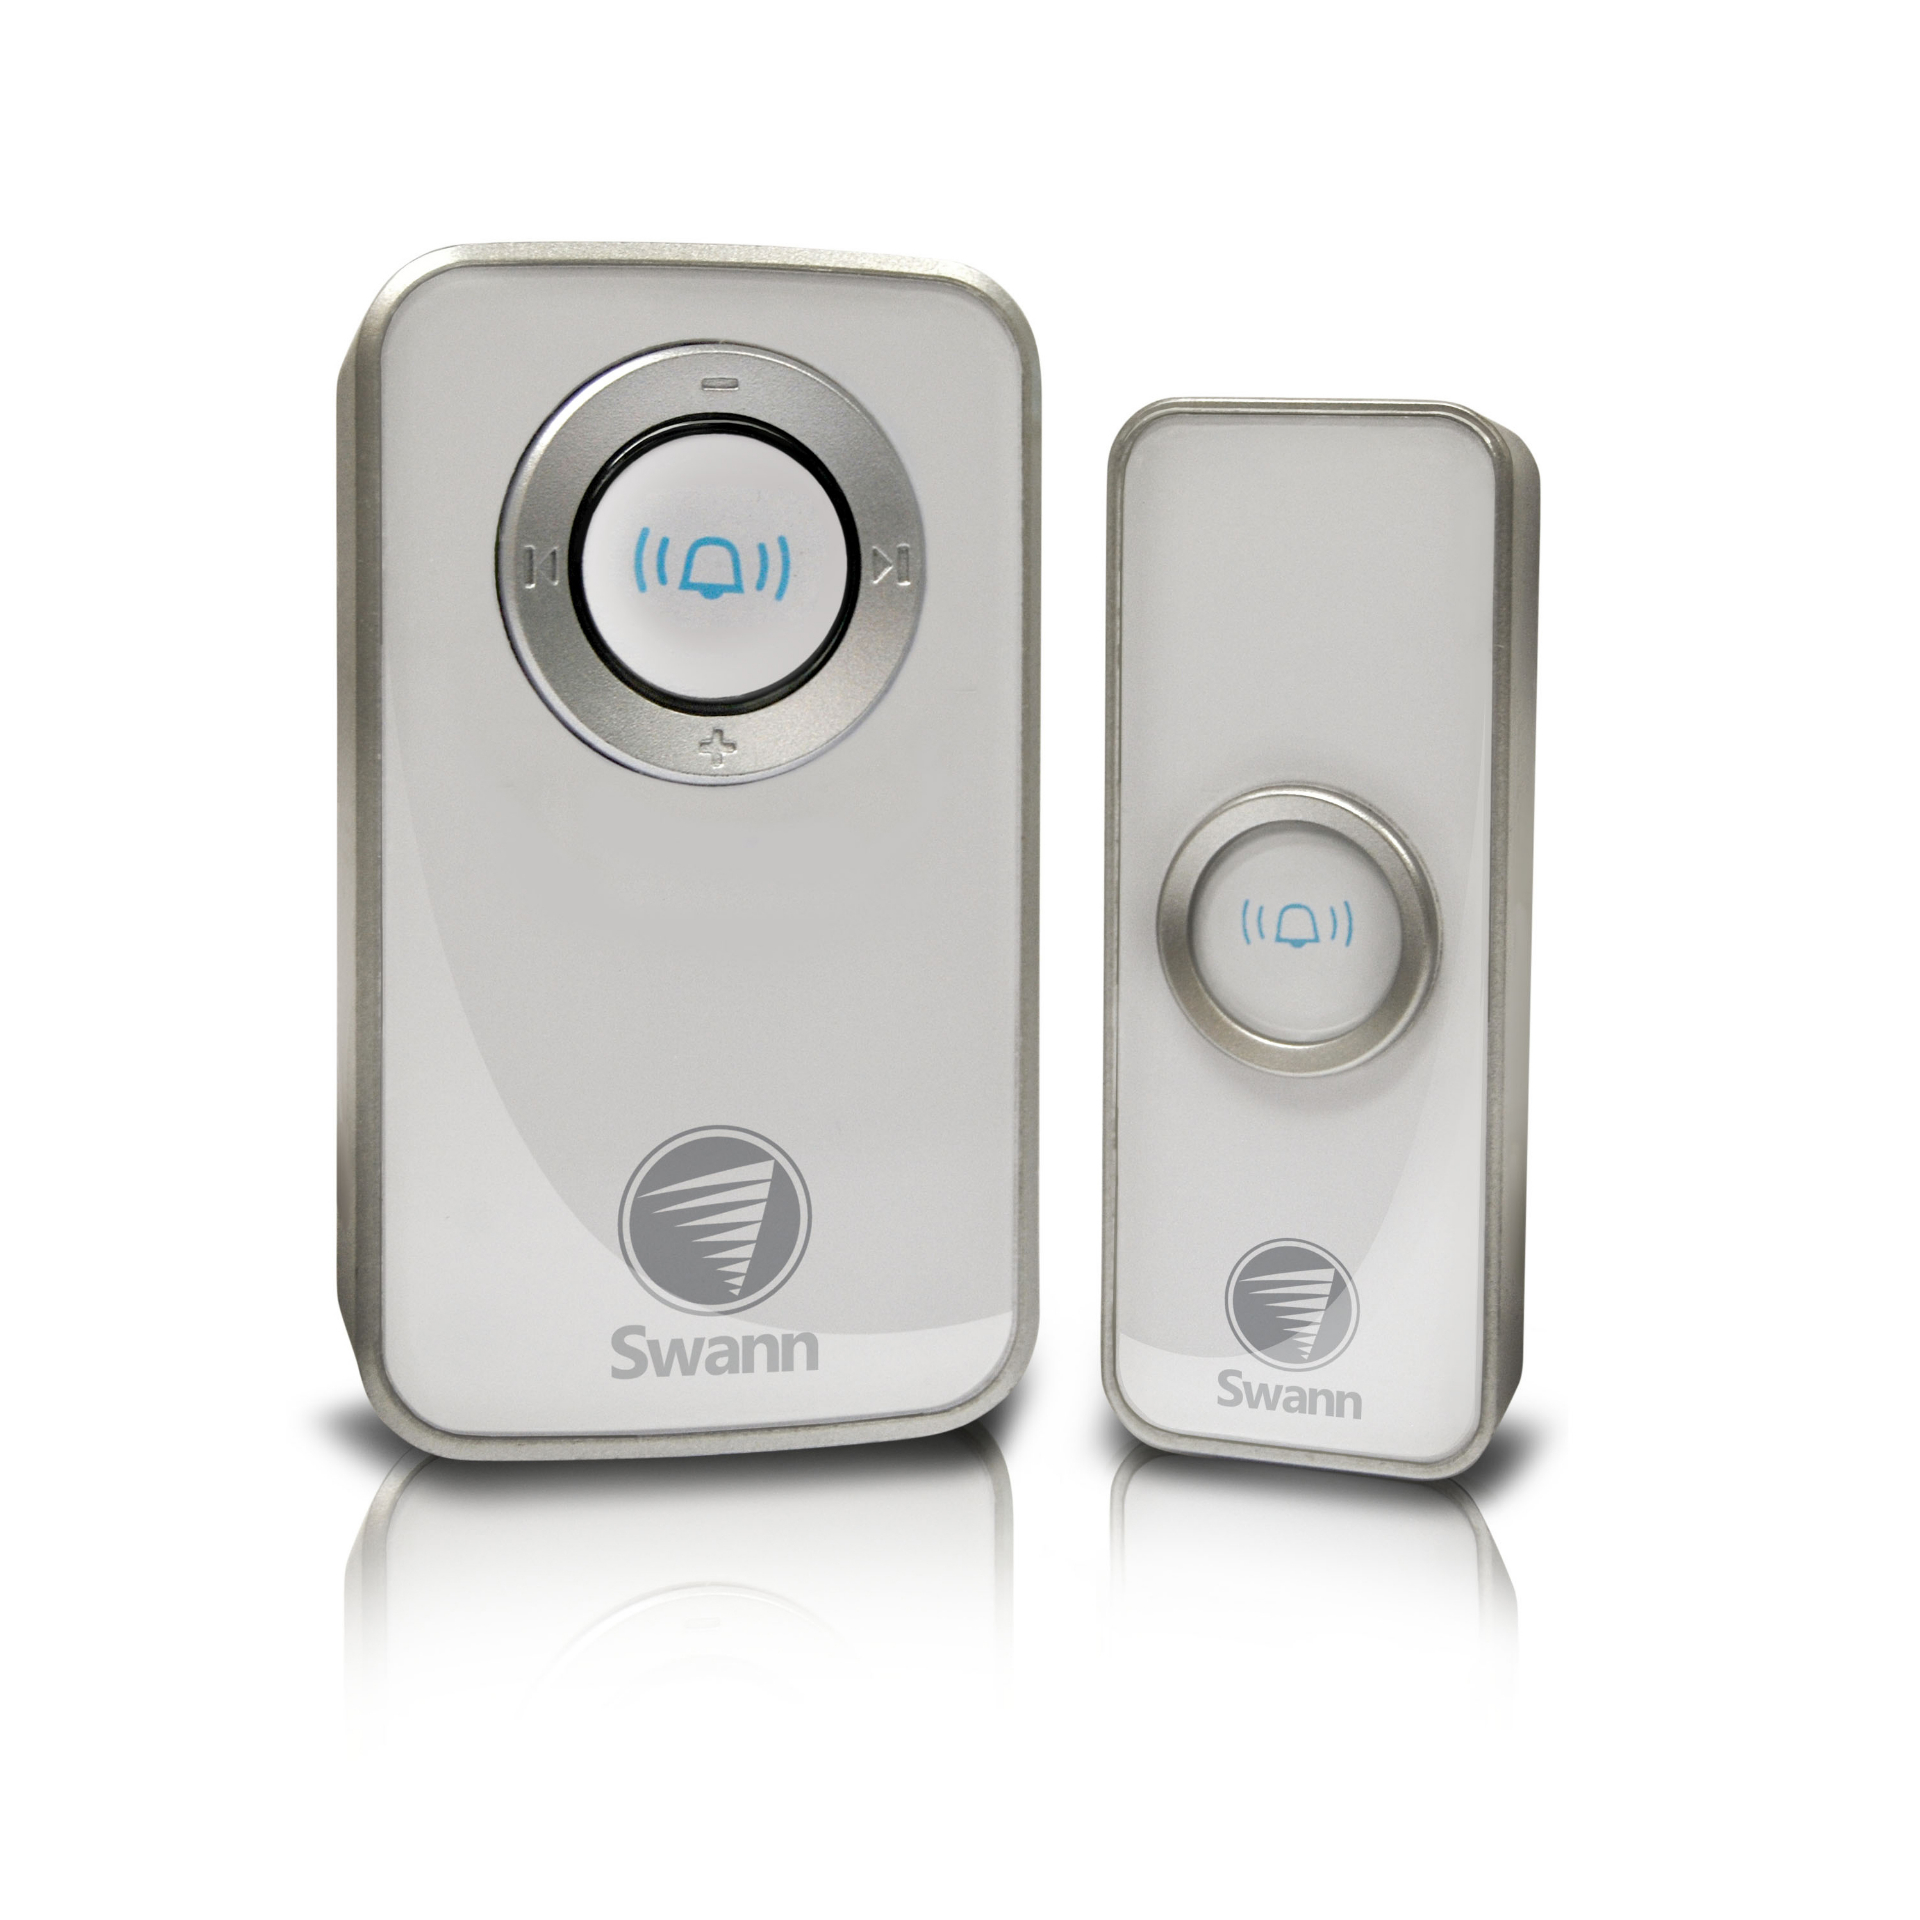 Swann DC820P Wireless Door Chime with Receiver